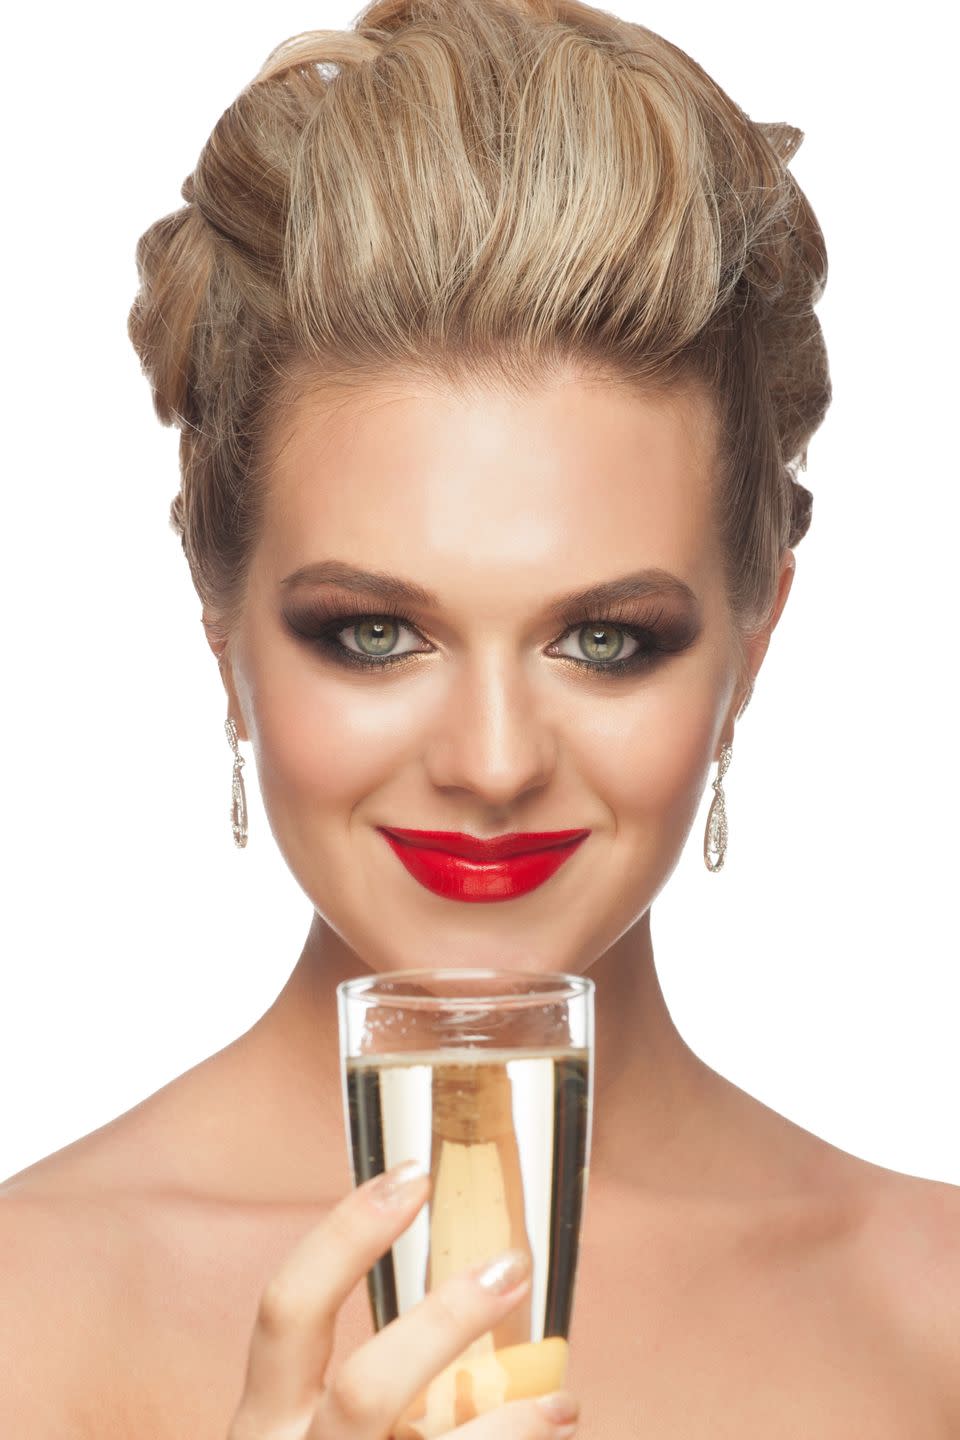 smiling woman with bright red lipstick and hair swept back high off her forehead and into a braid with a glass of champagne